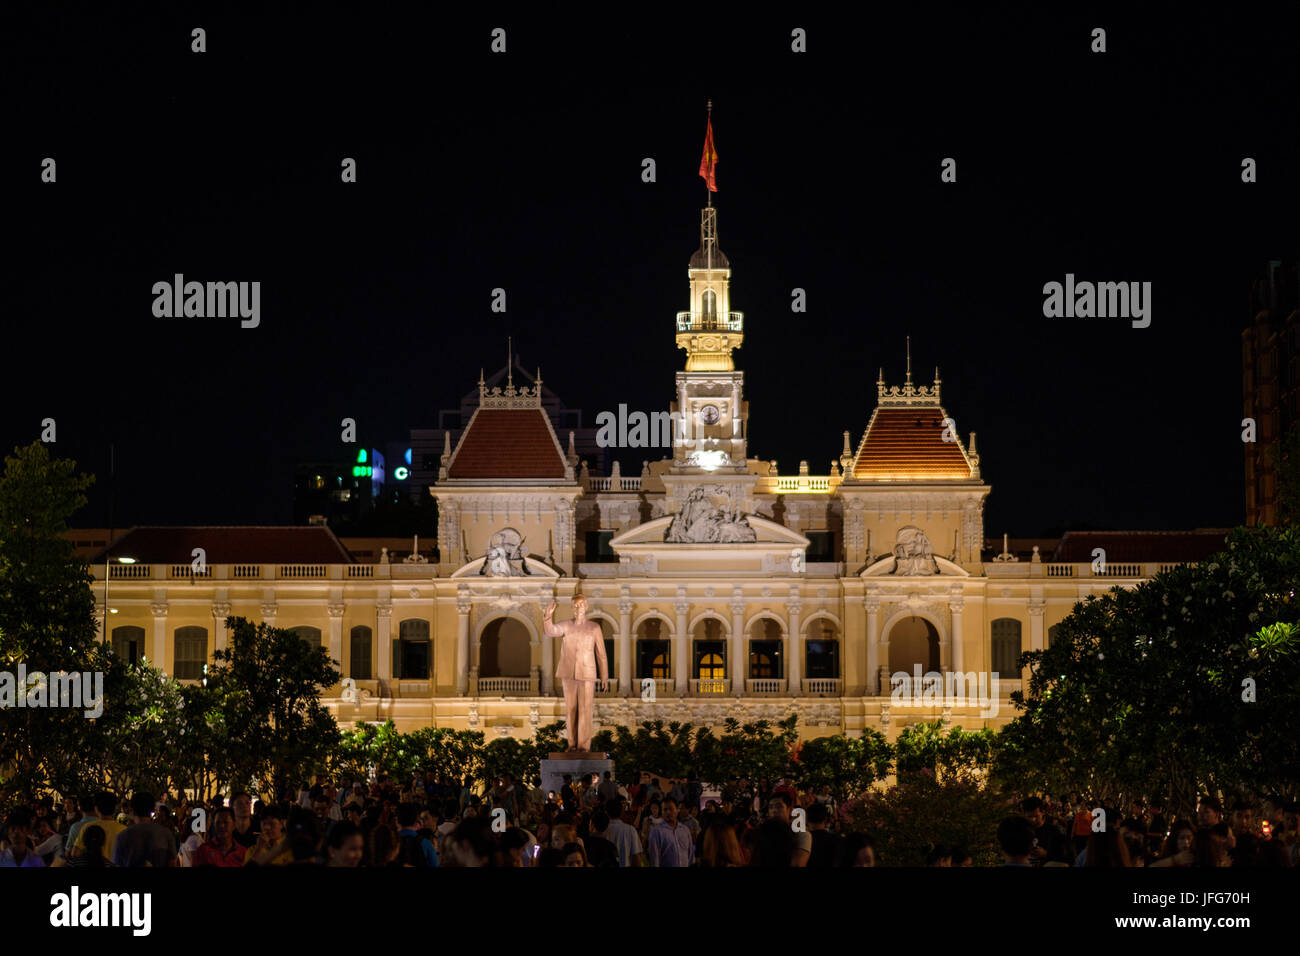 Statue of communist leader Ho Chi Minh in front of the City Hall building, Ho Chi Minh City, Vietnam, Asia Stock Photo